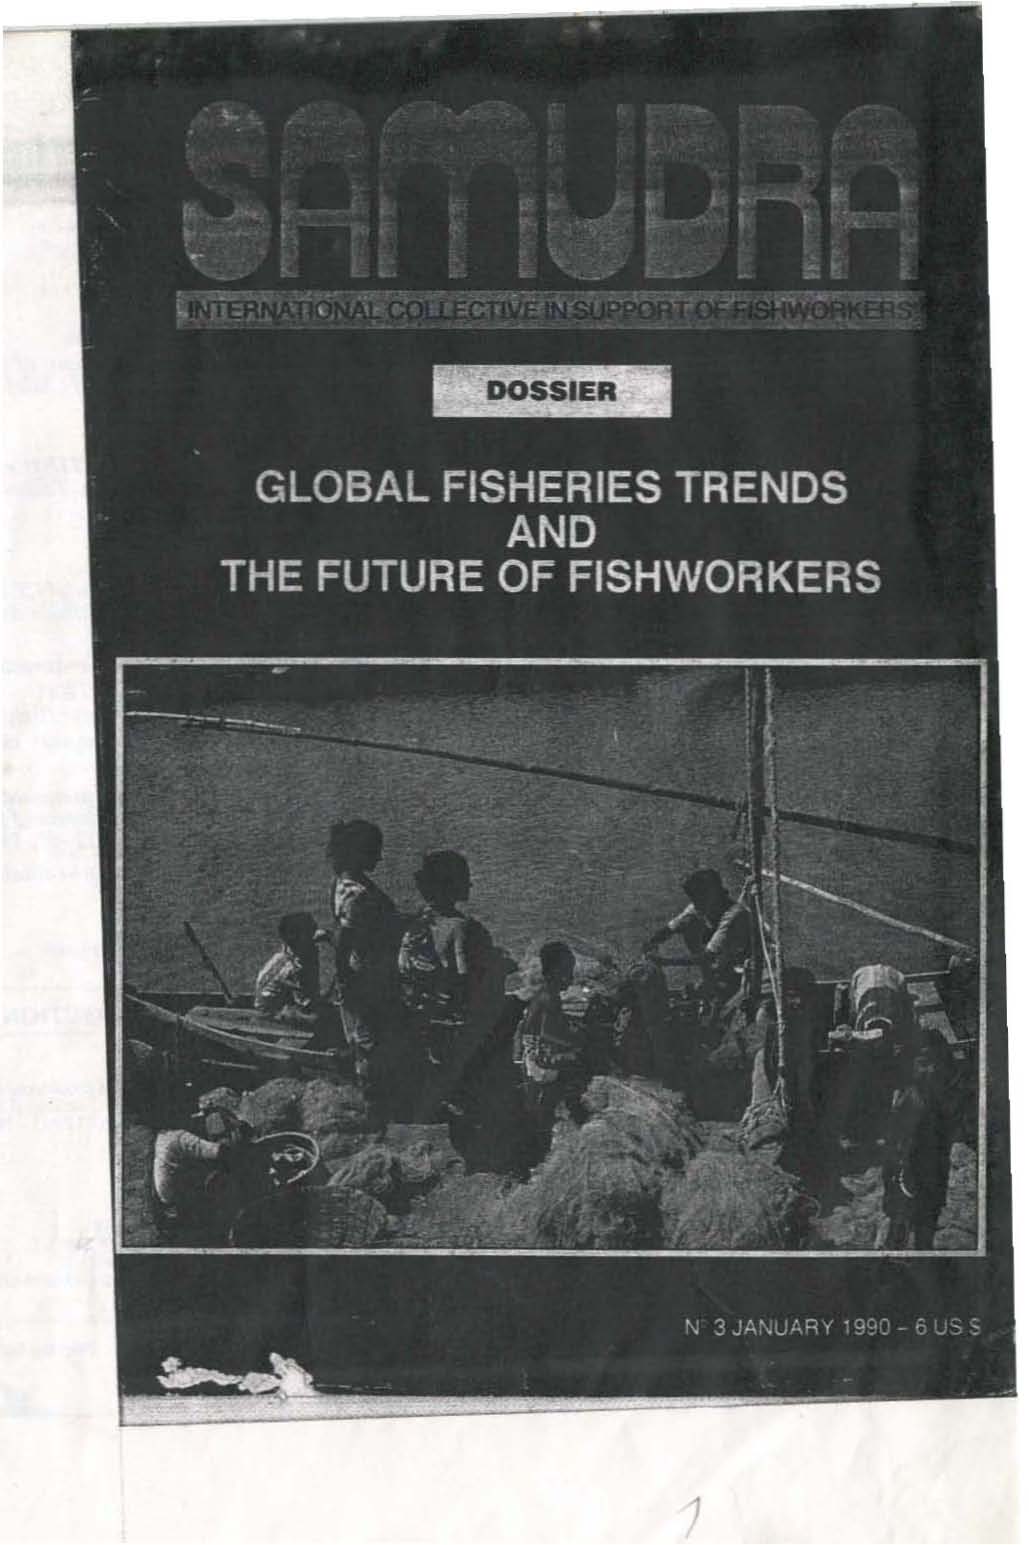 Global fisheries trends and the future of fishworkers, Samudra Dossier No. 3